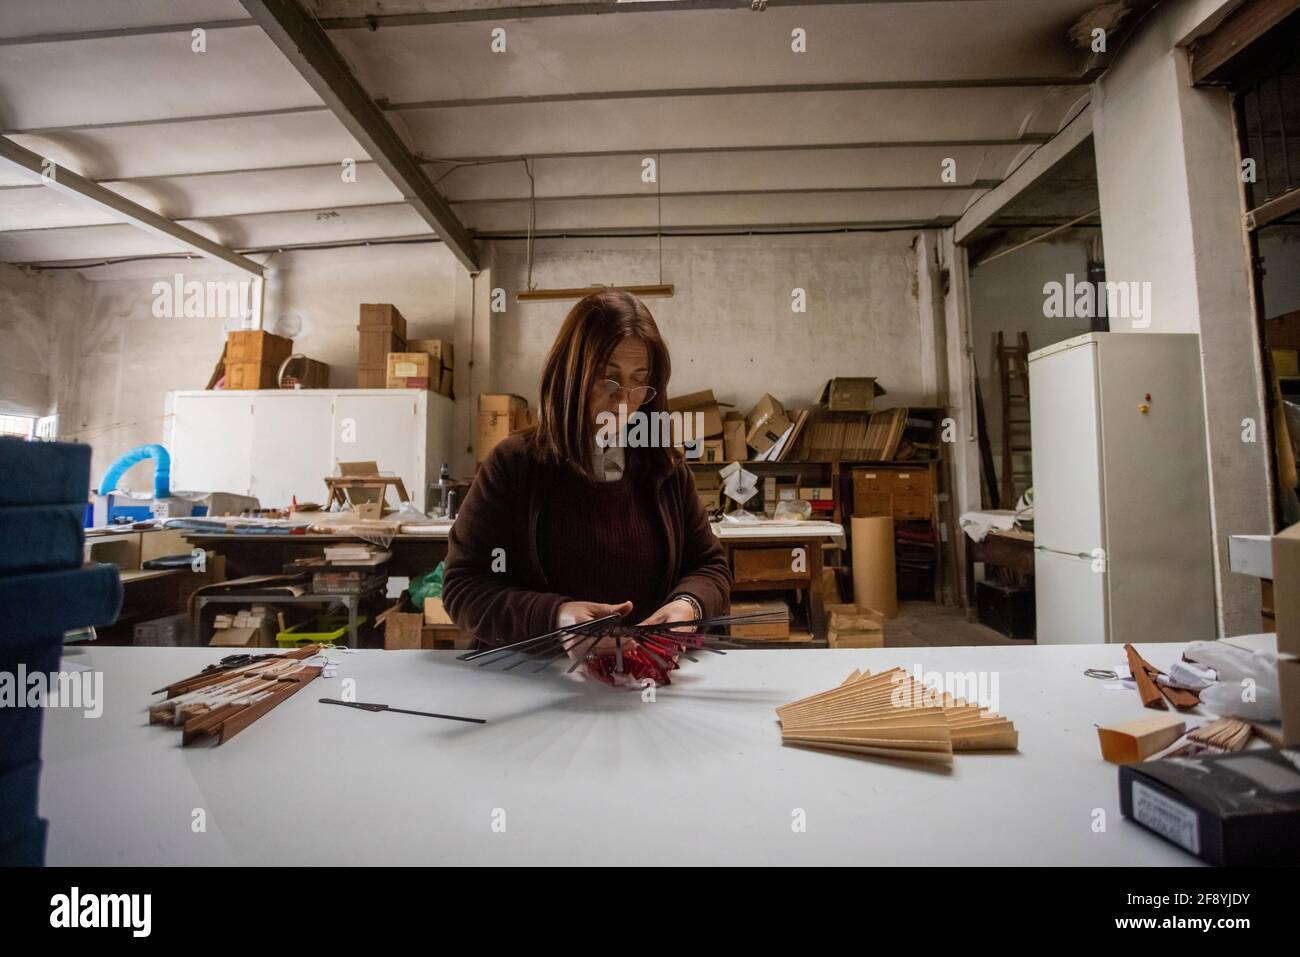 Spanish woman working at a hand fan design workshop Stock Photo